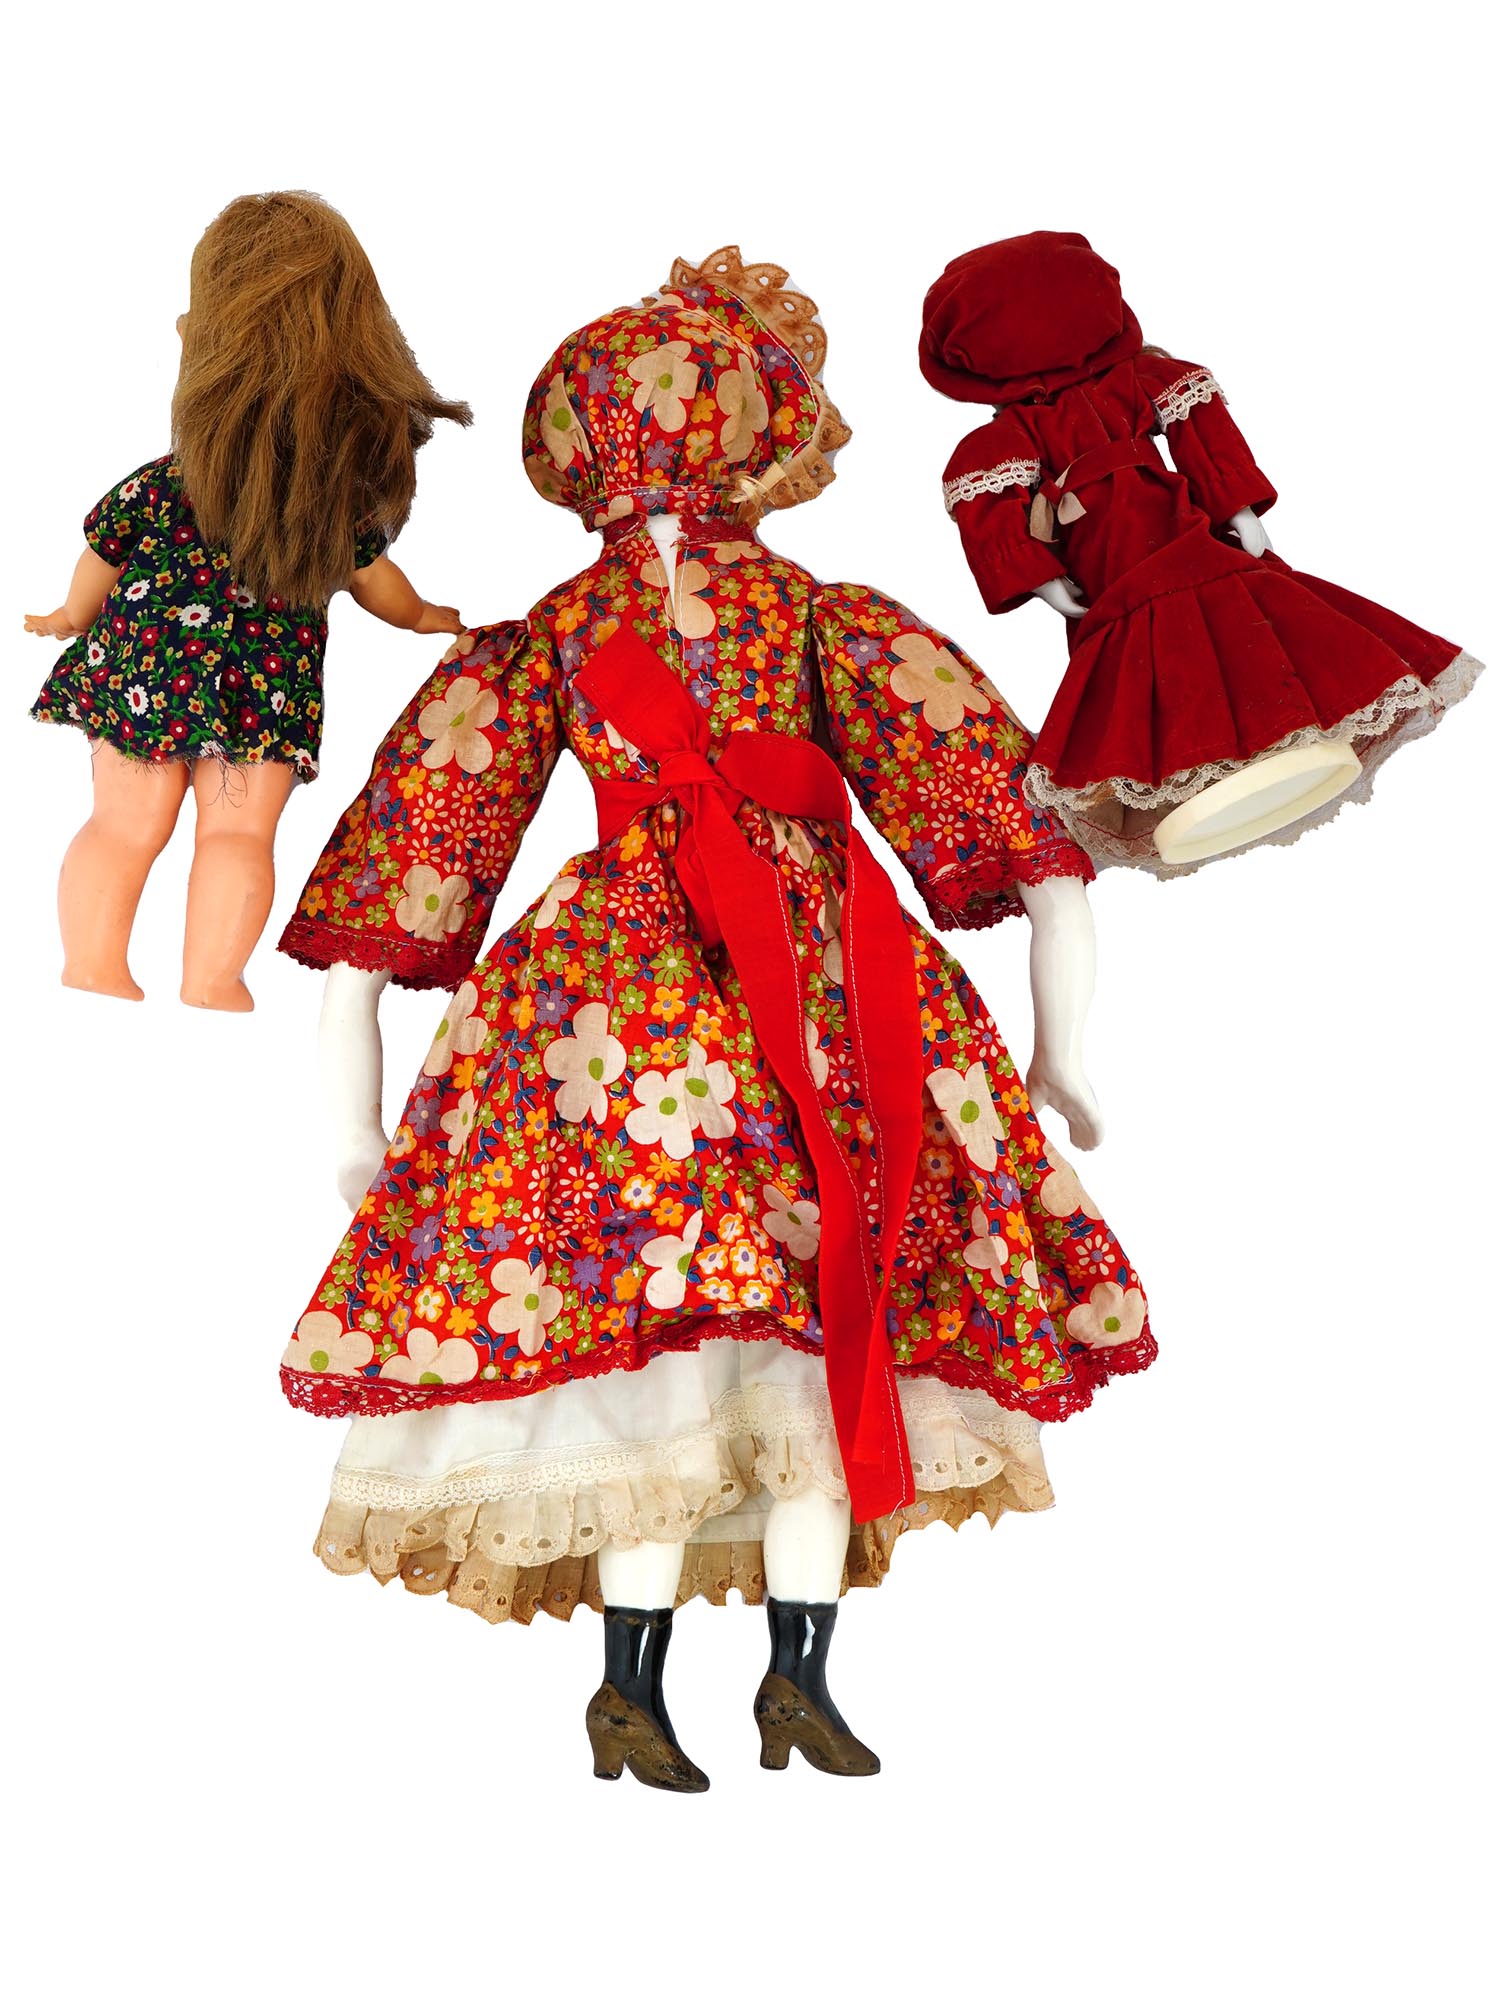 COLLECTION OF VINTAGE PORCELAIN DOLLS IN OUTFITS PIC-2